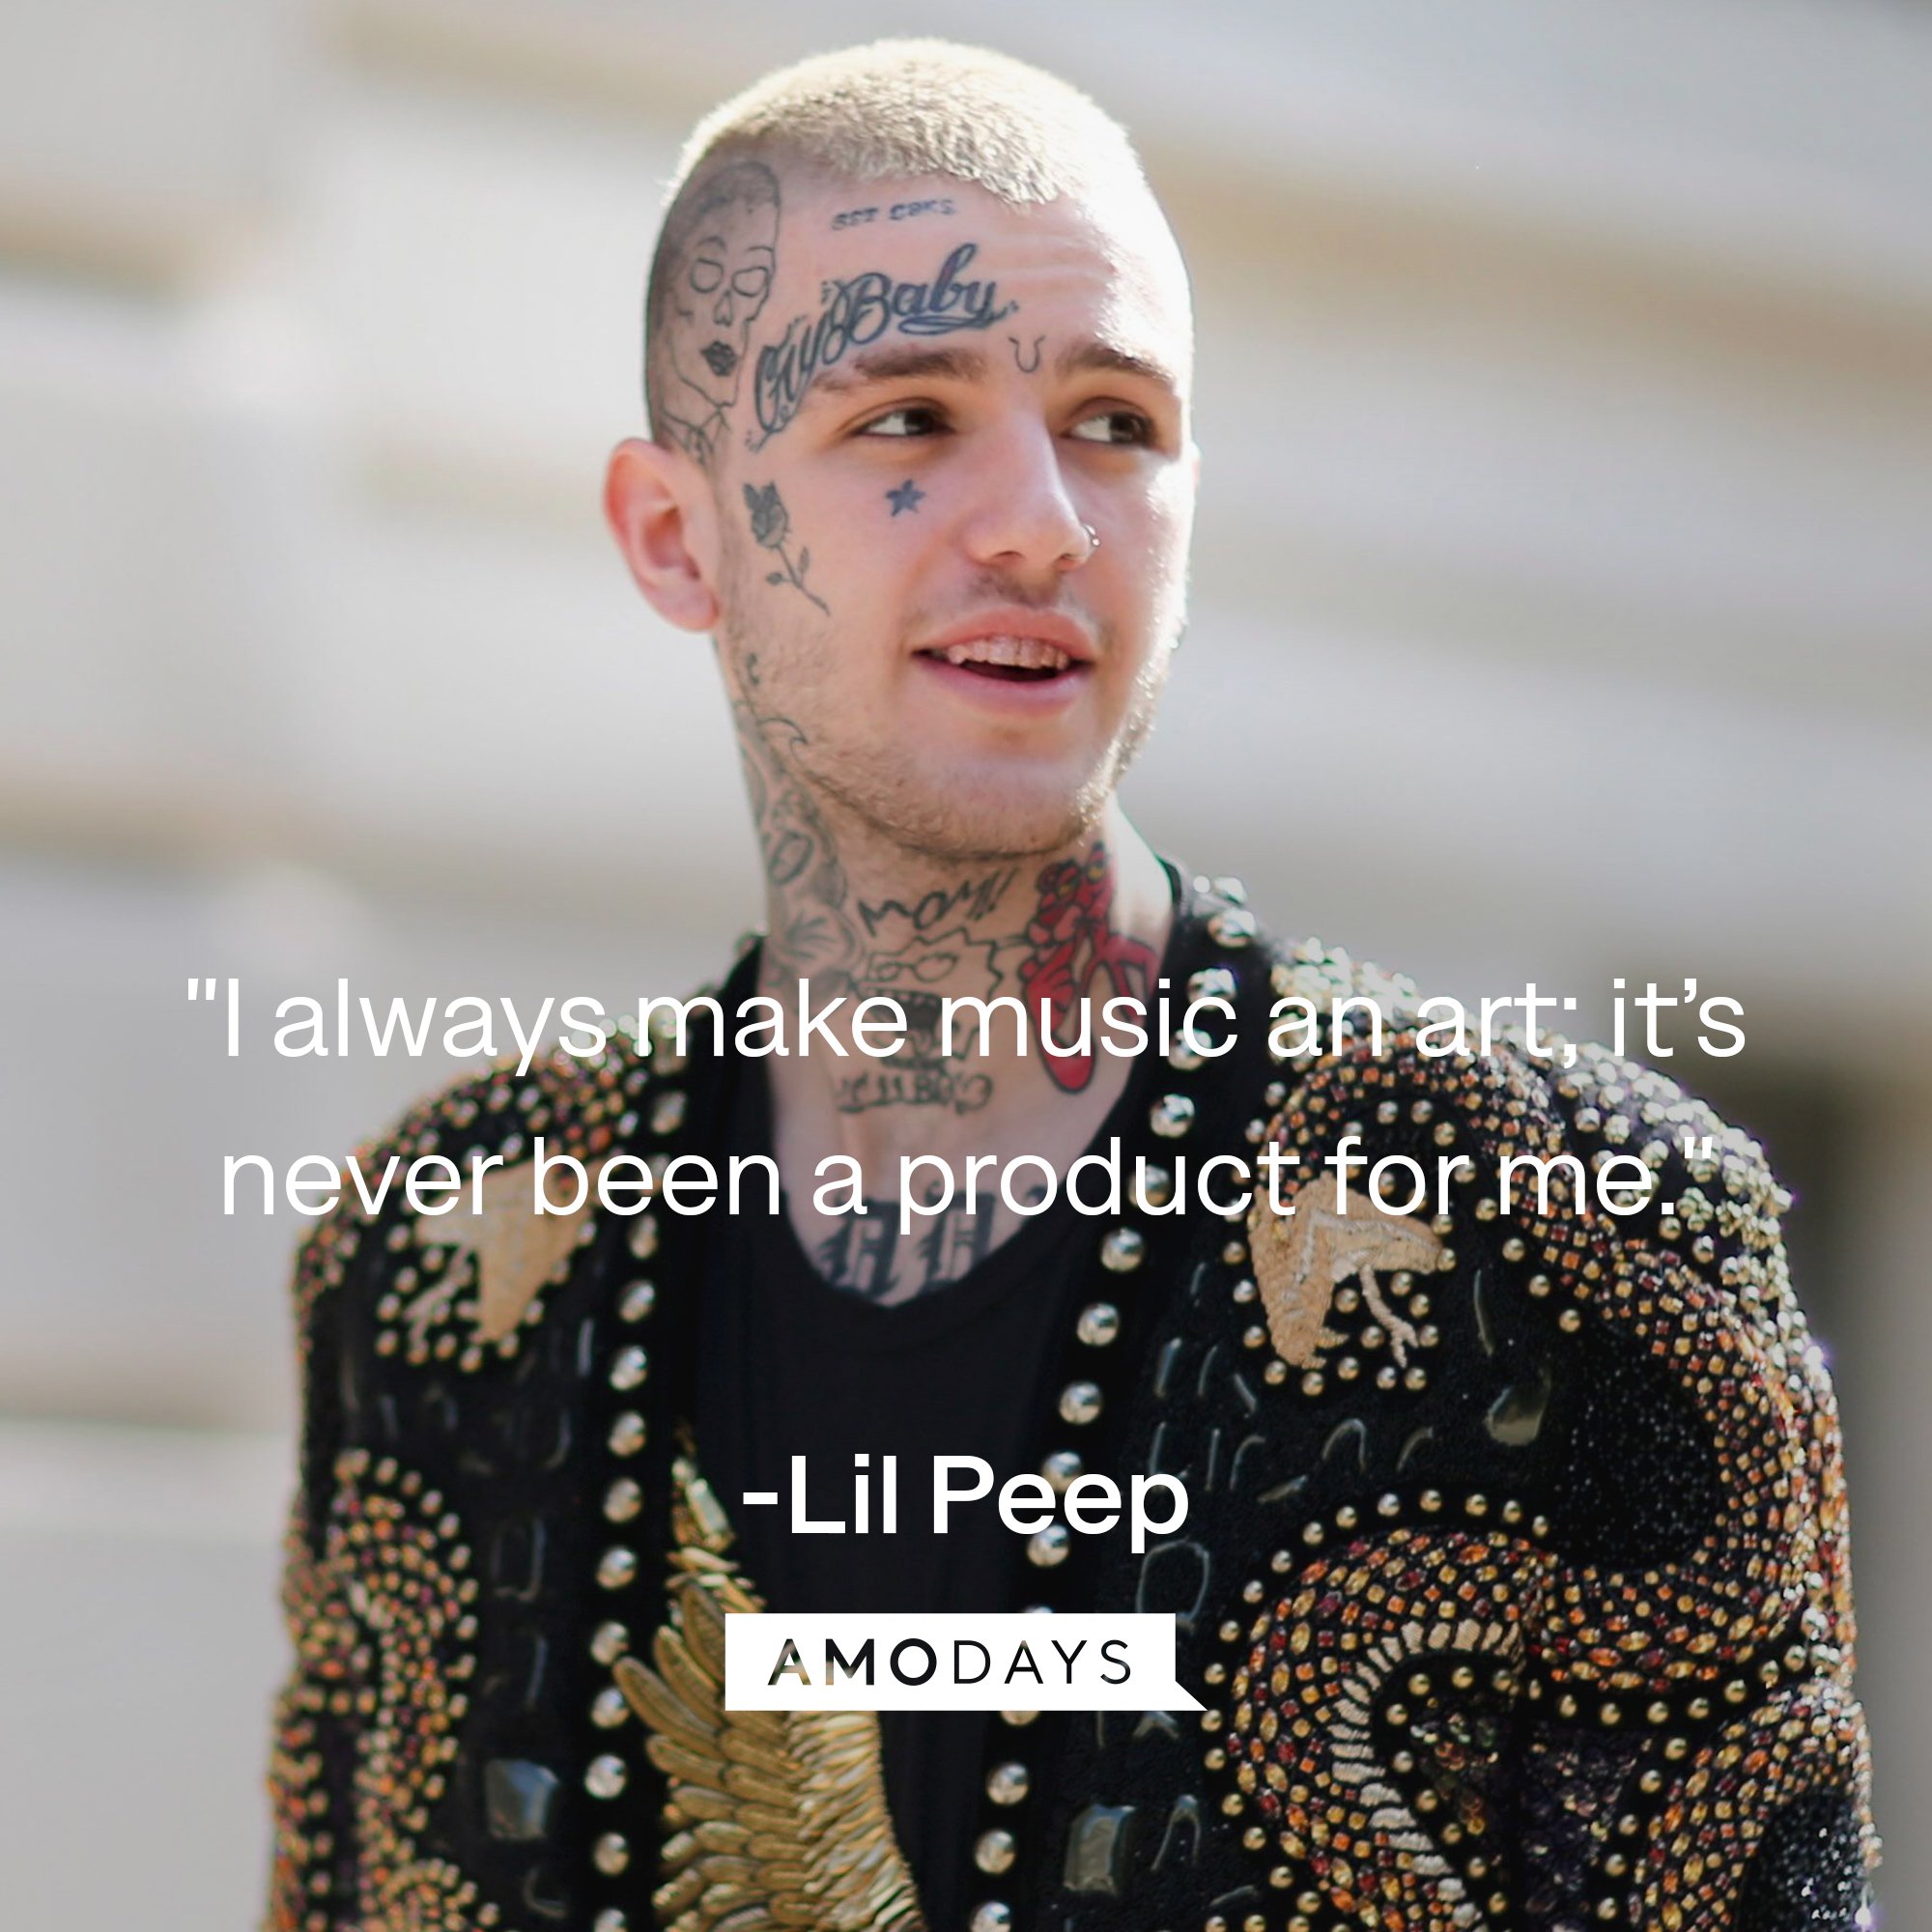 Lil Peep's quote: "I always make music an art; it’s never been a product for me." | Image: AmoDays